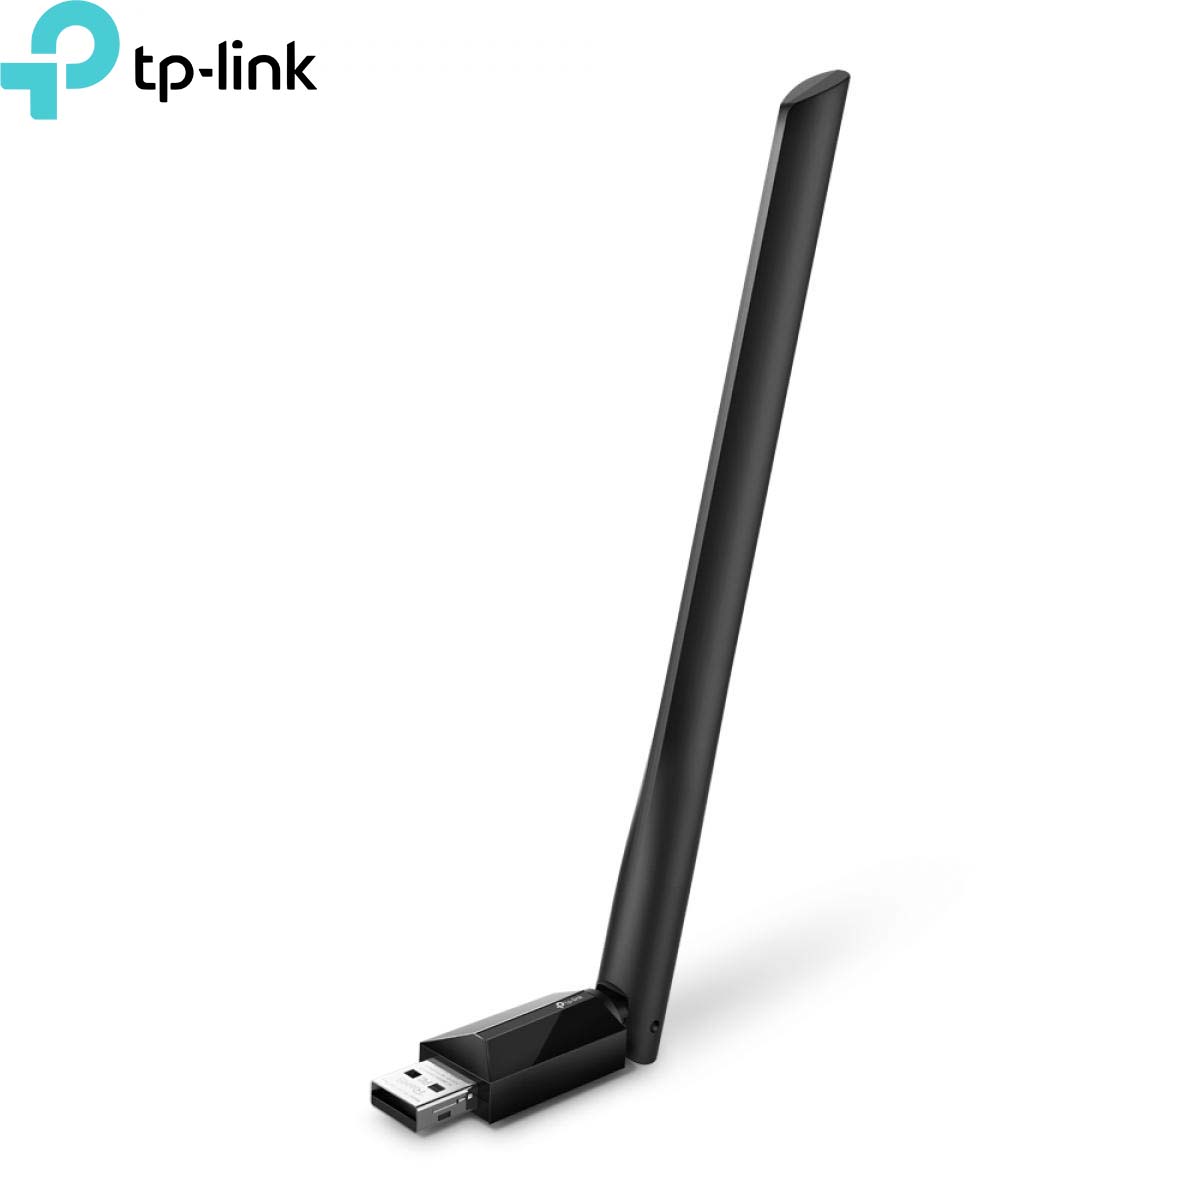 TP-Link AC600 Doual Band USB Adapter